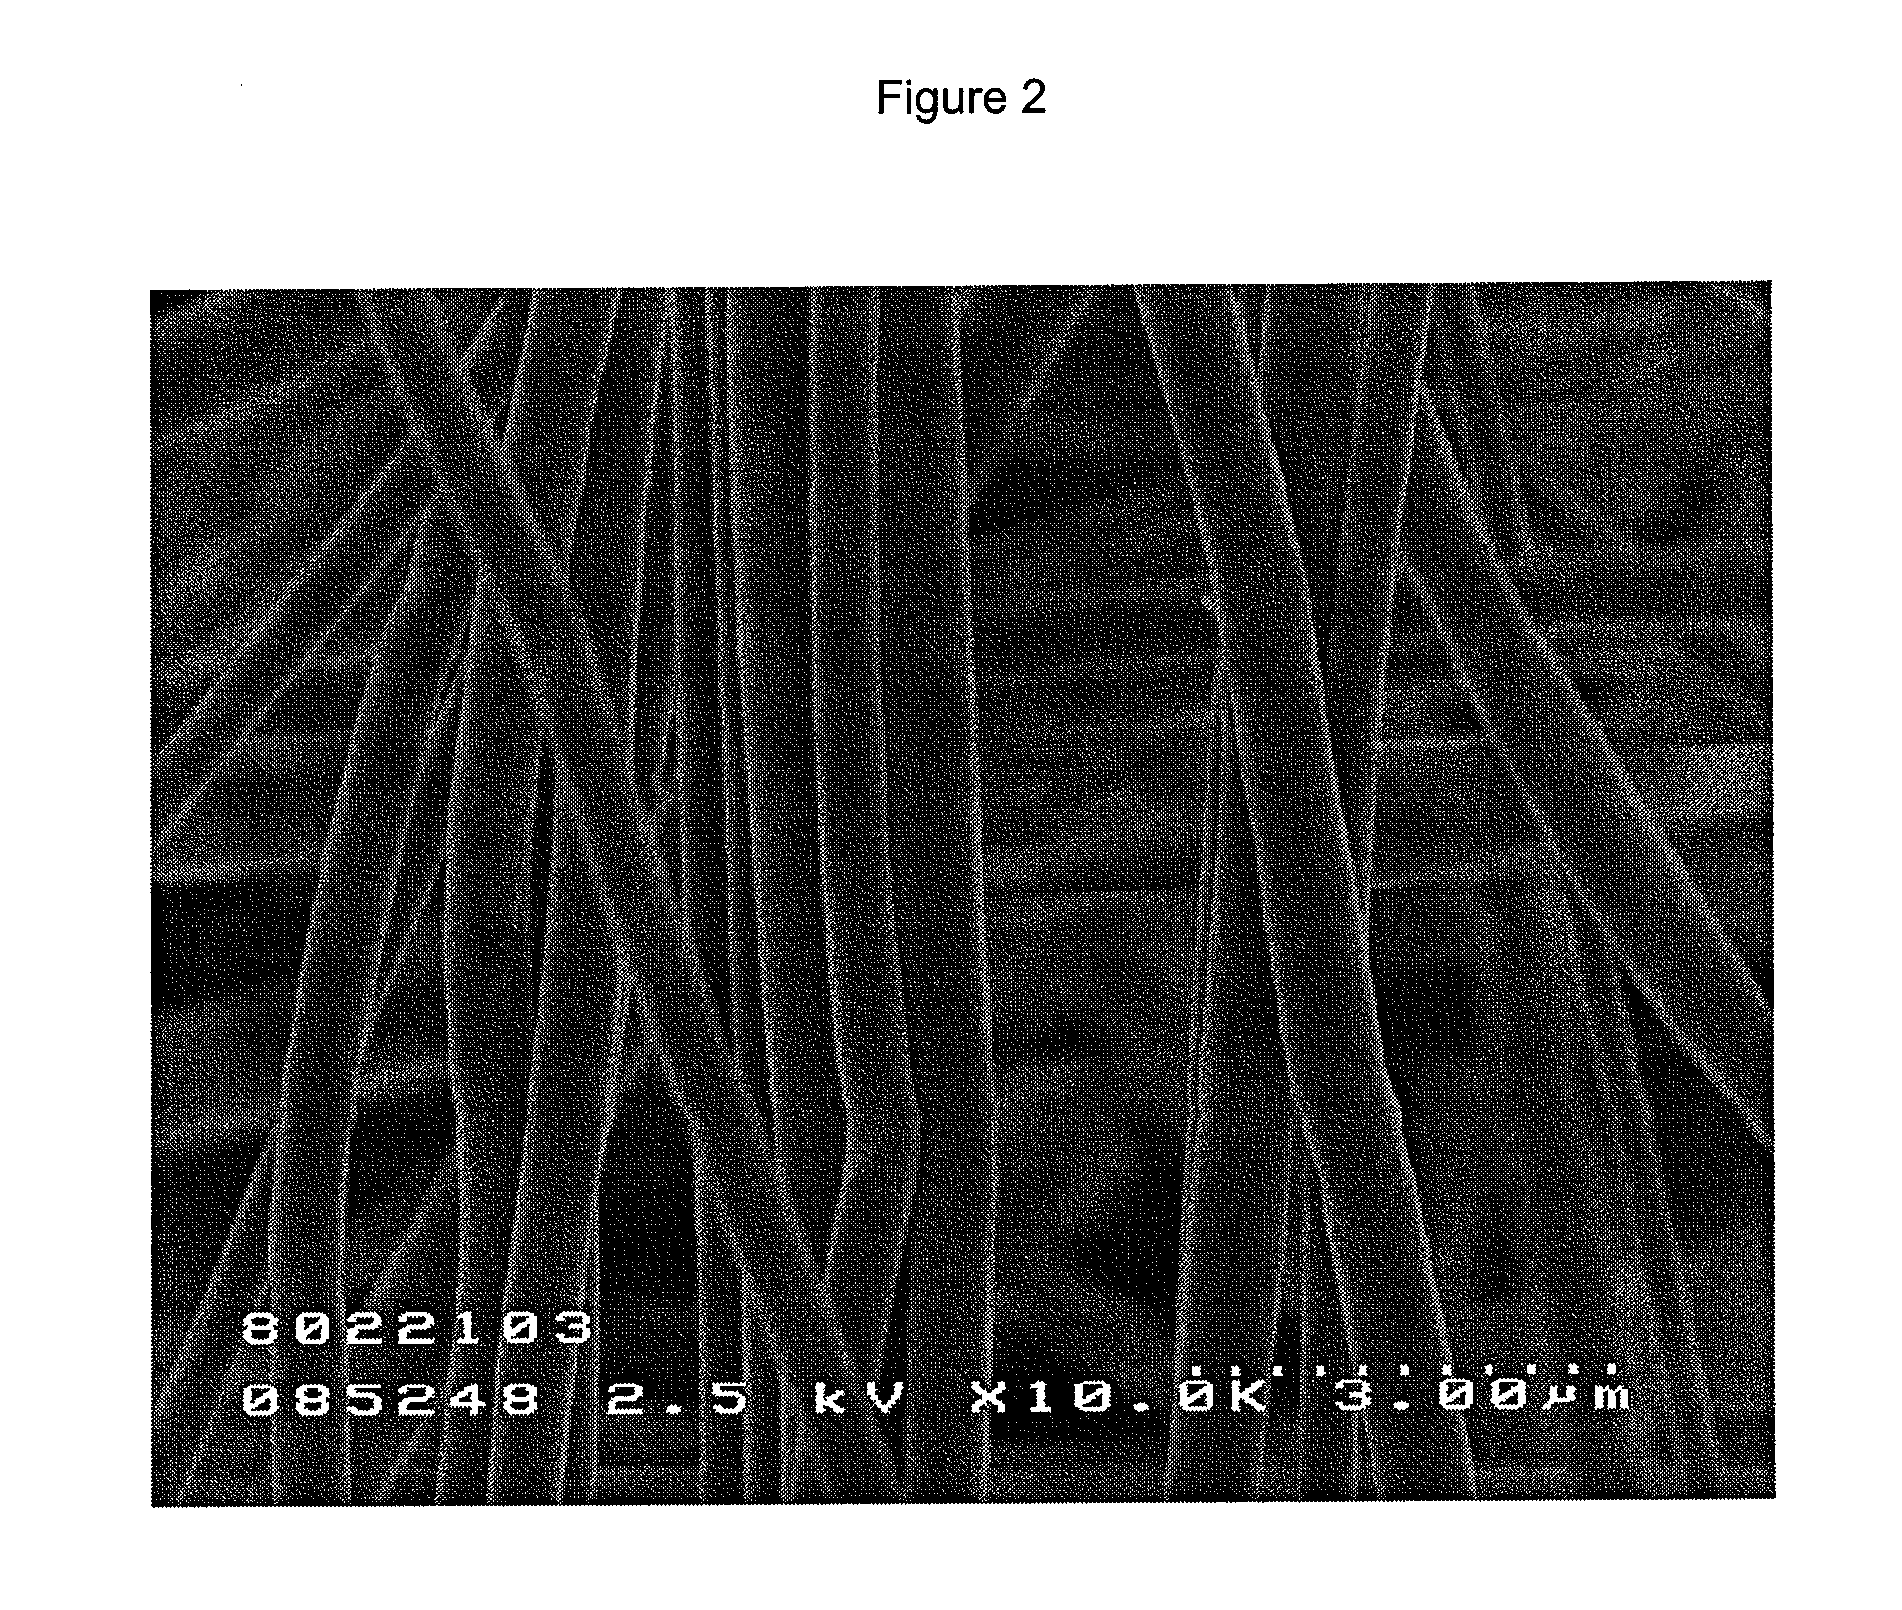 Fibrous tissue sealant and method of using same